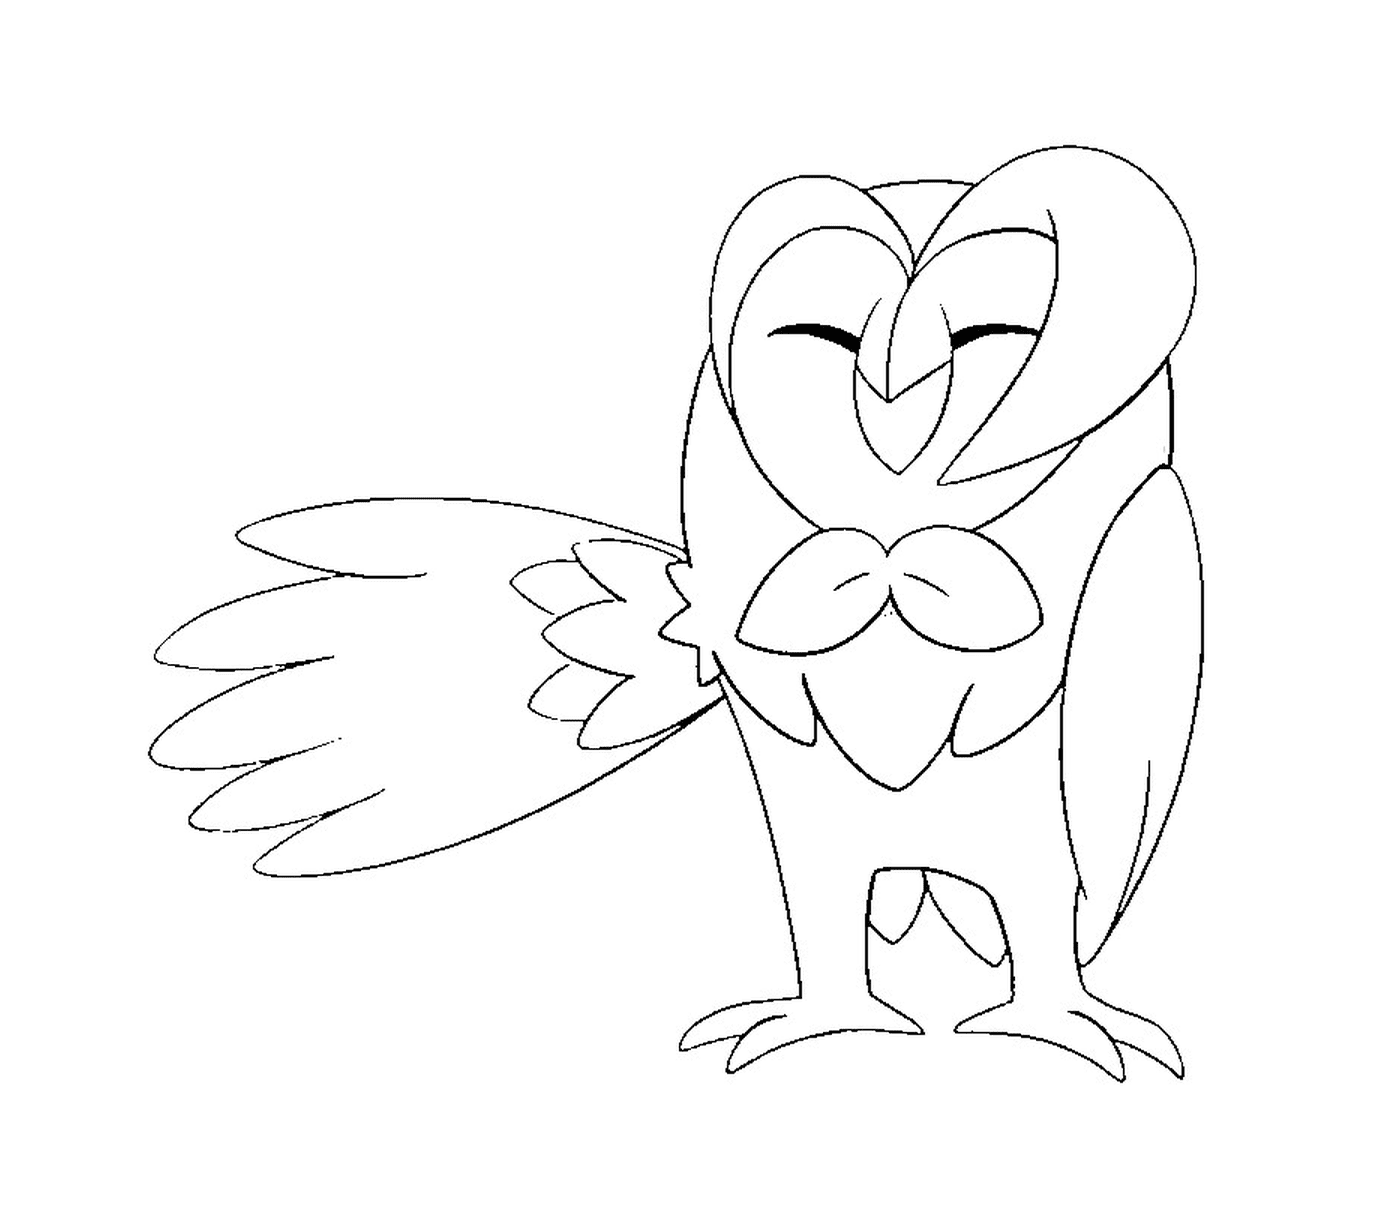  Efleche, an owl with closed eyes 